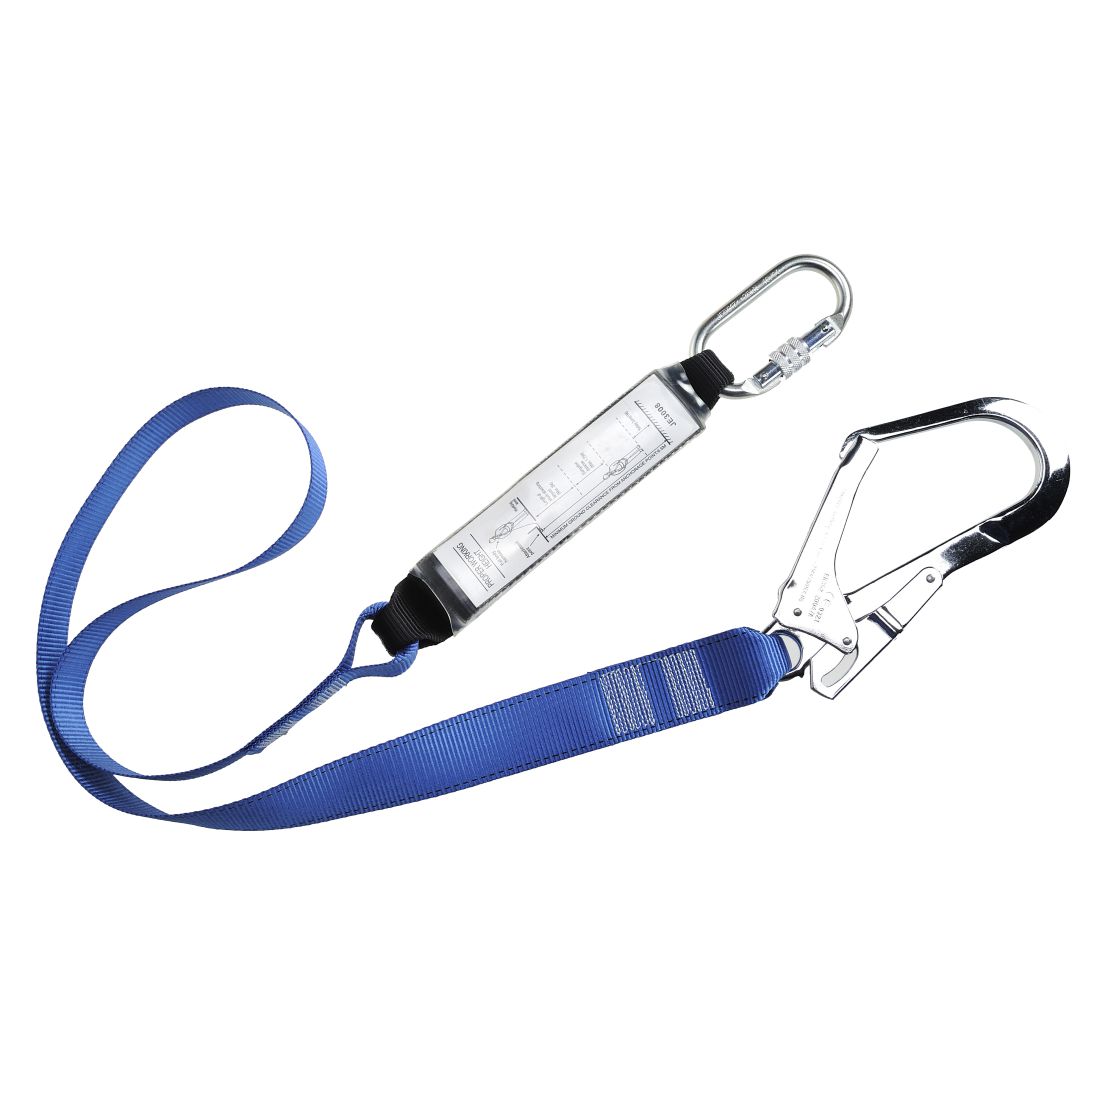 FP50 Webbing Lanyard With Shock Absorber - Click Image to Close